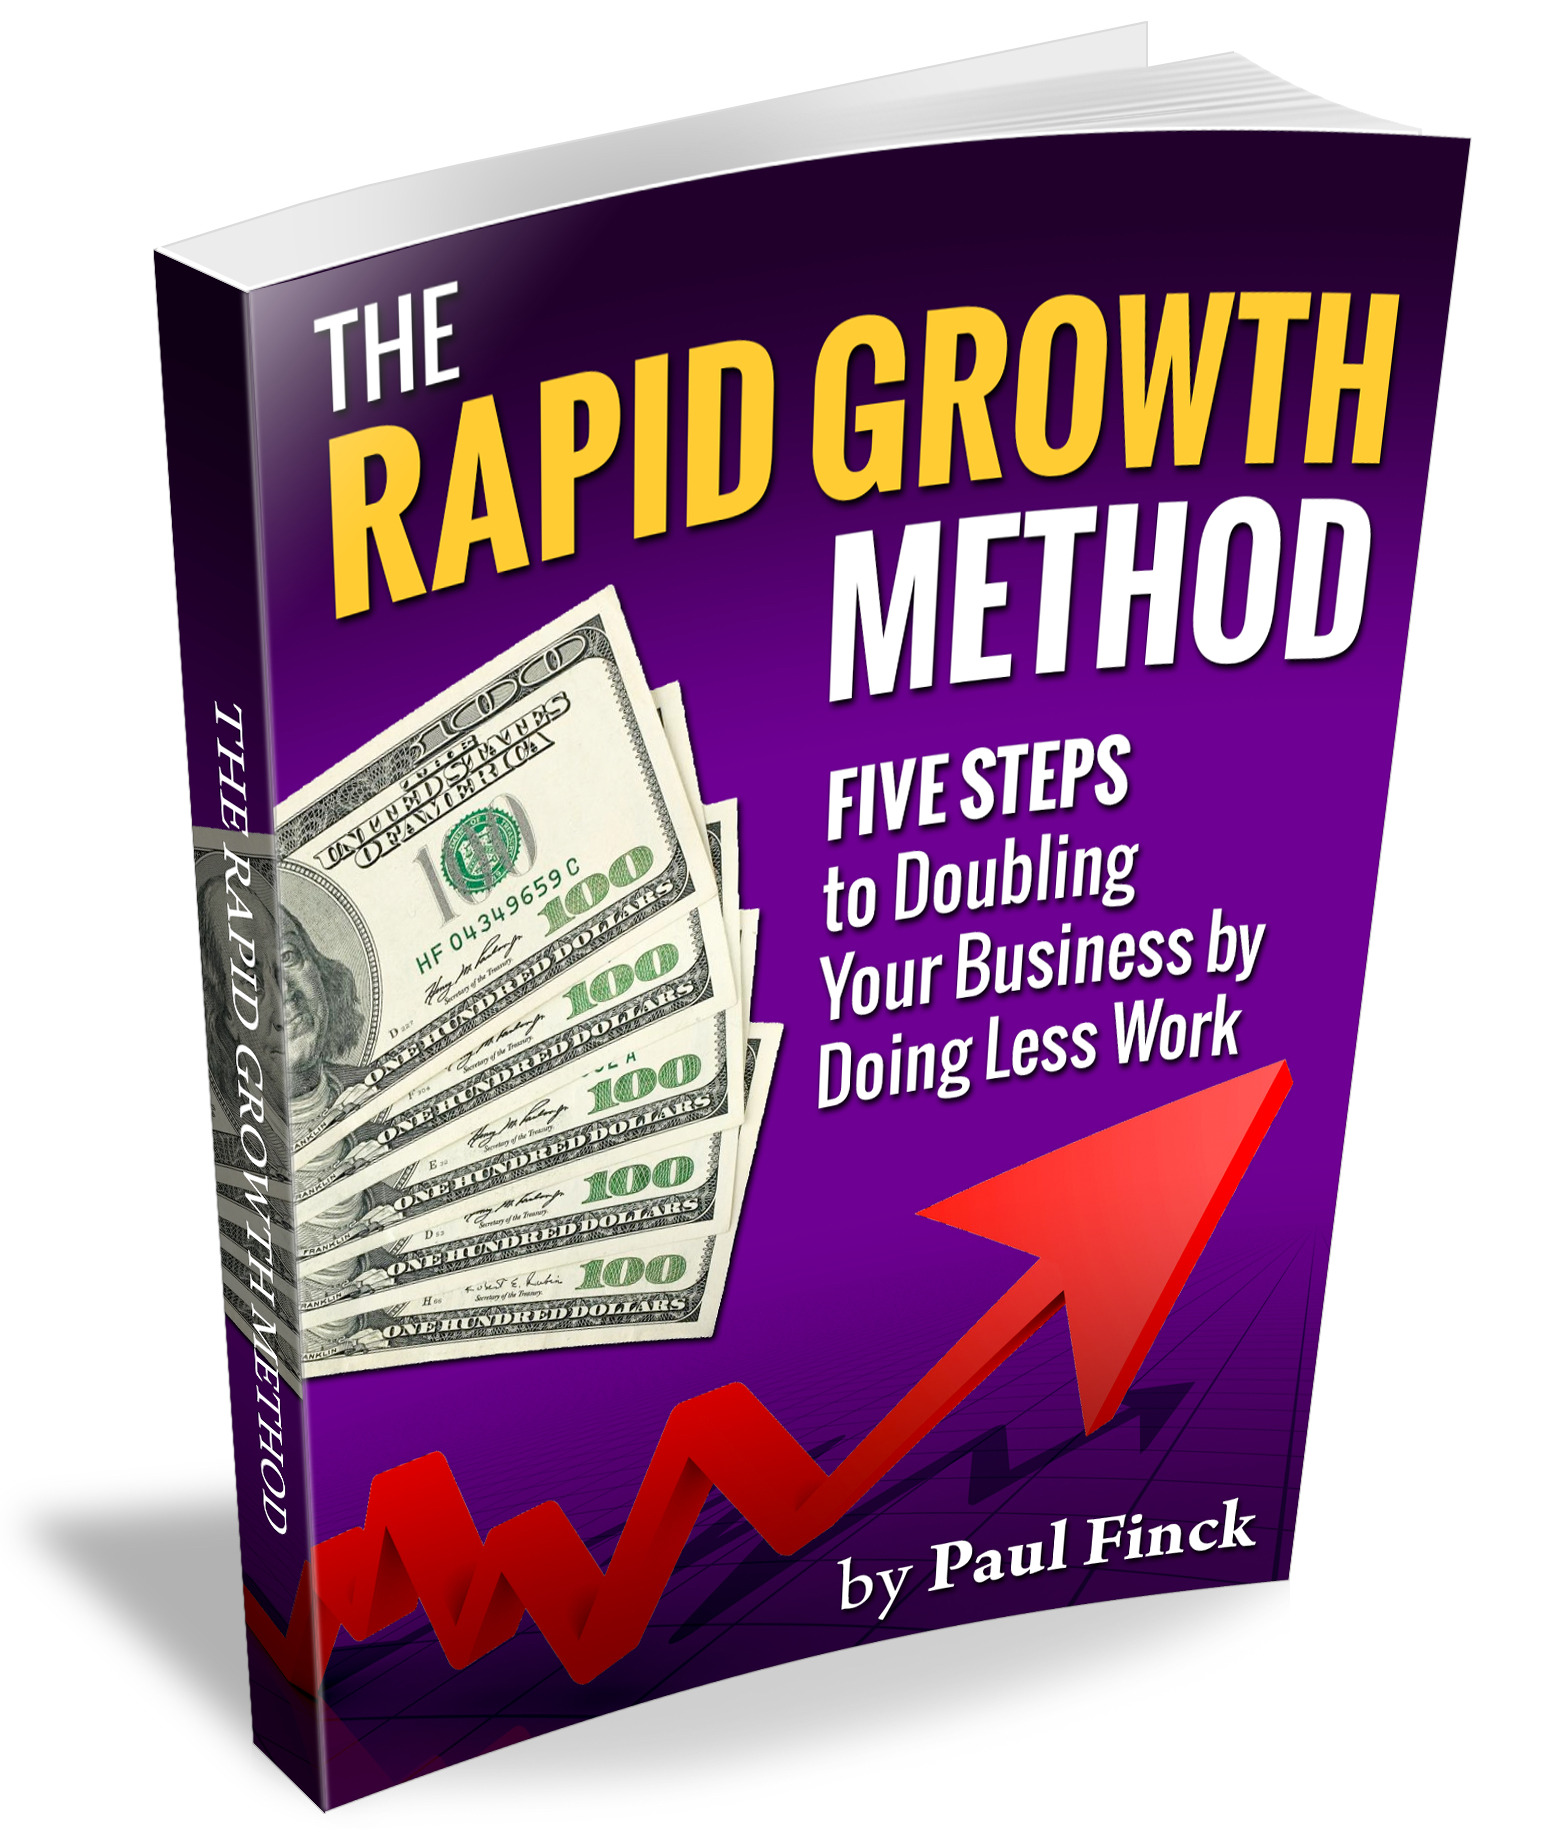 Paul Finck's Rapid Growth Method - Double Your Income In 5 Easy Steps